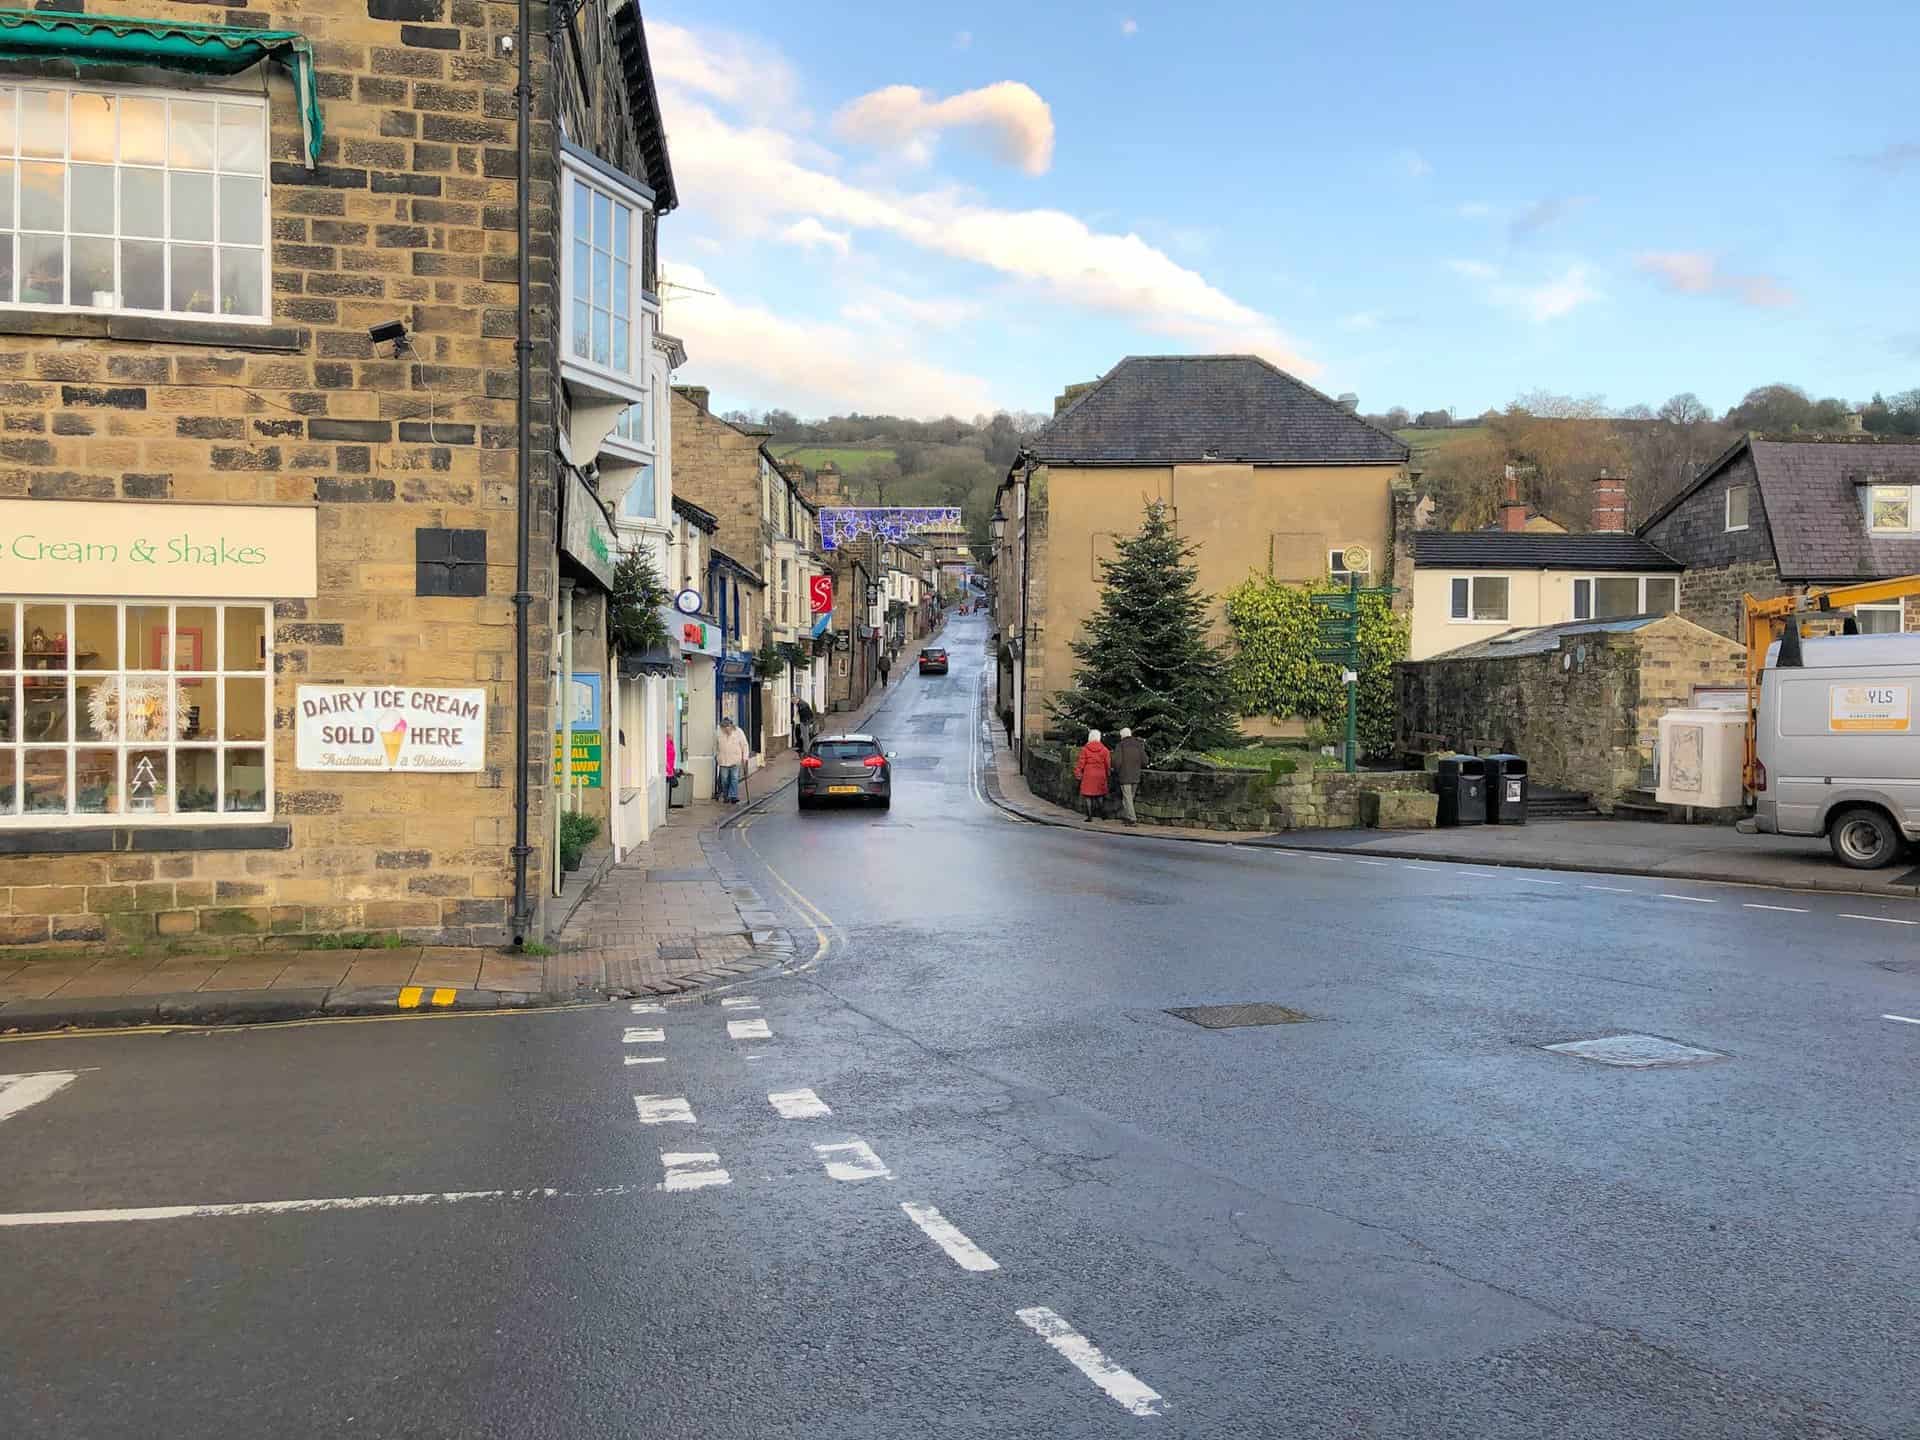 Pateley Bridge. This is the only town in the Nidderdale AONB (Area of Outstanding Natural Beauty).